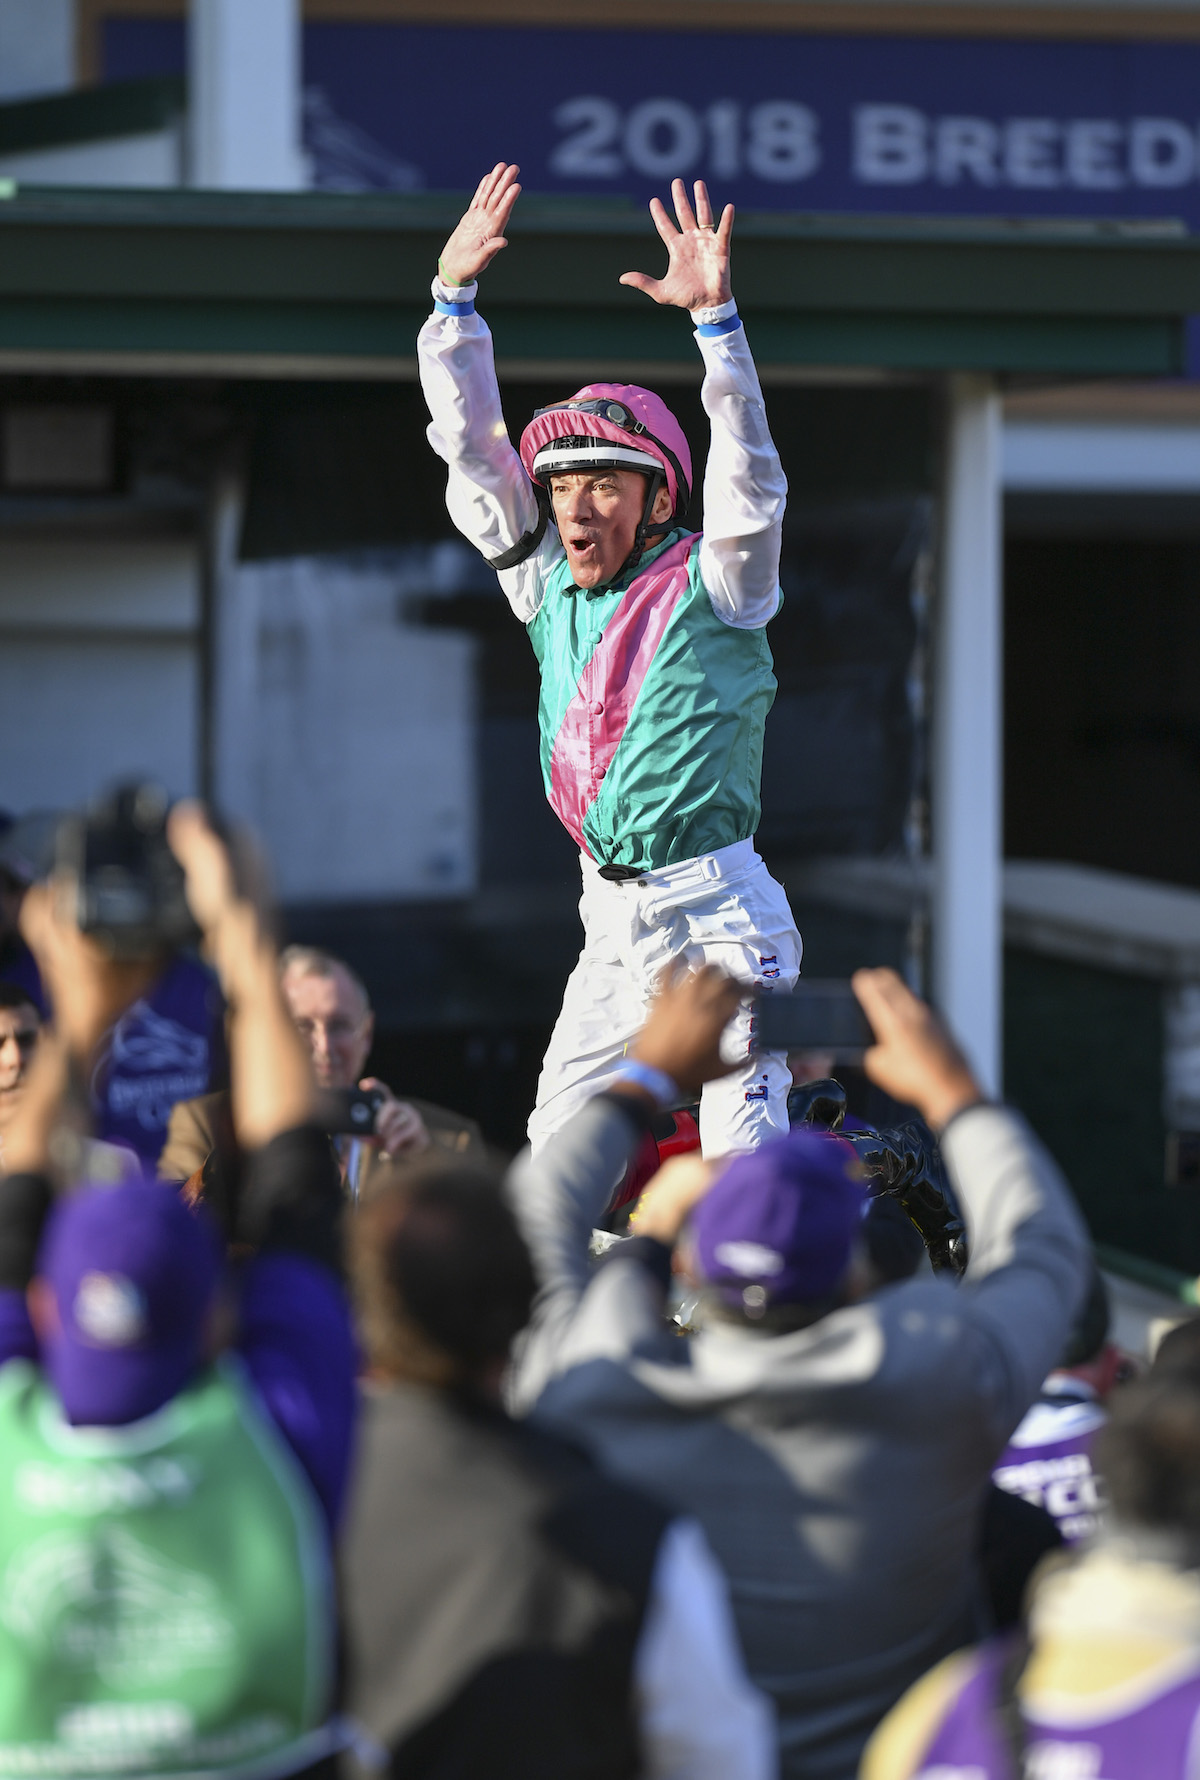 Frankie Dettori with the inevitable flying dismount after Enable completes the Arc/Breeders’ Cup double. Photo: Michael McInally/Eclipse Sportswire /Breeders' Cup